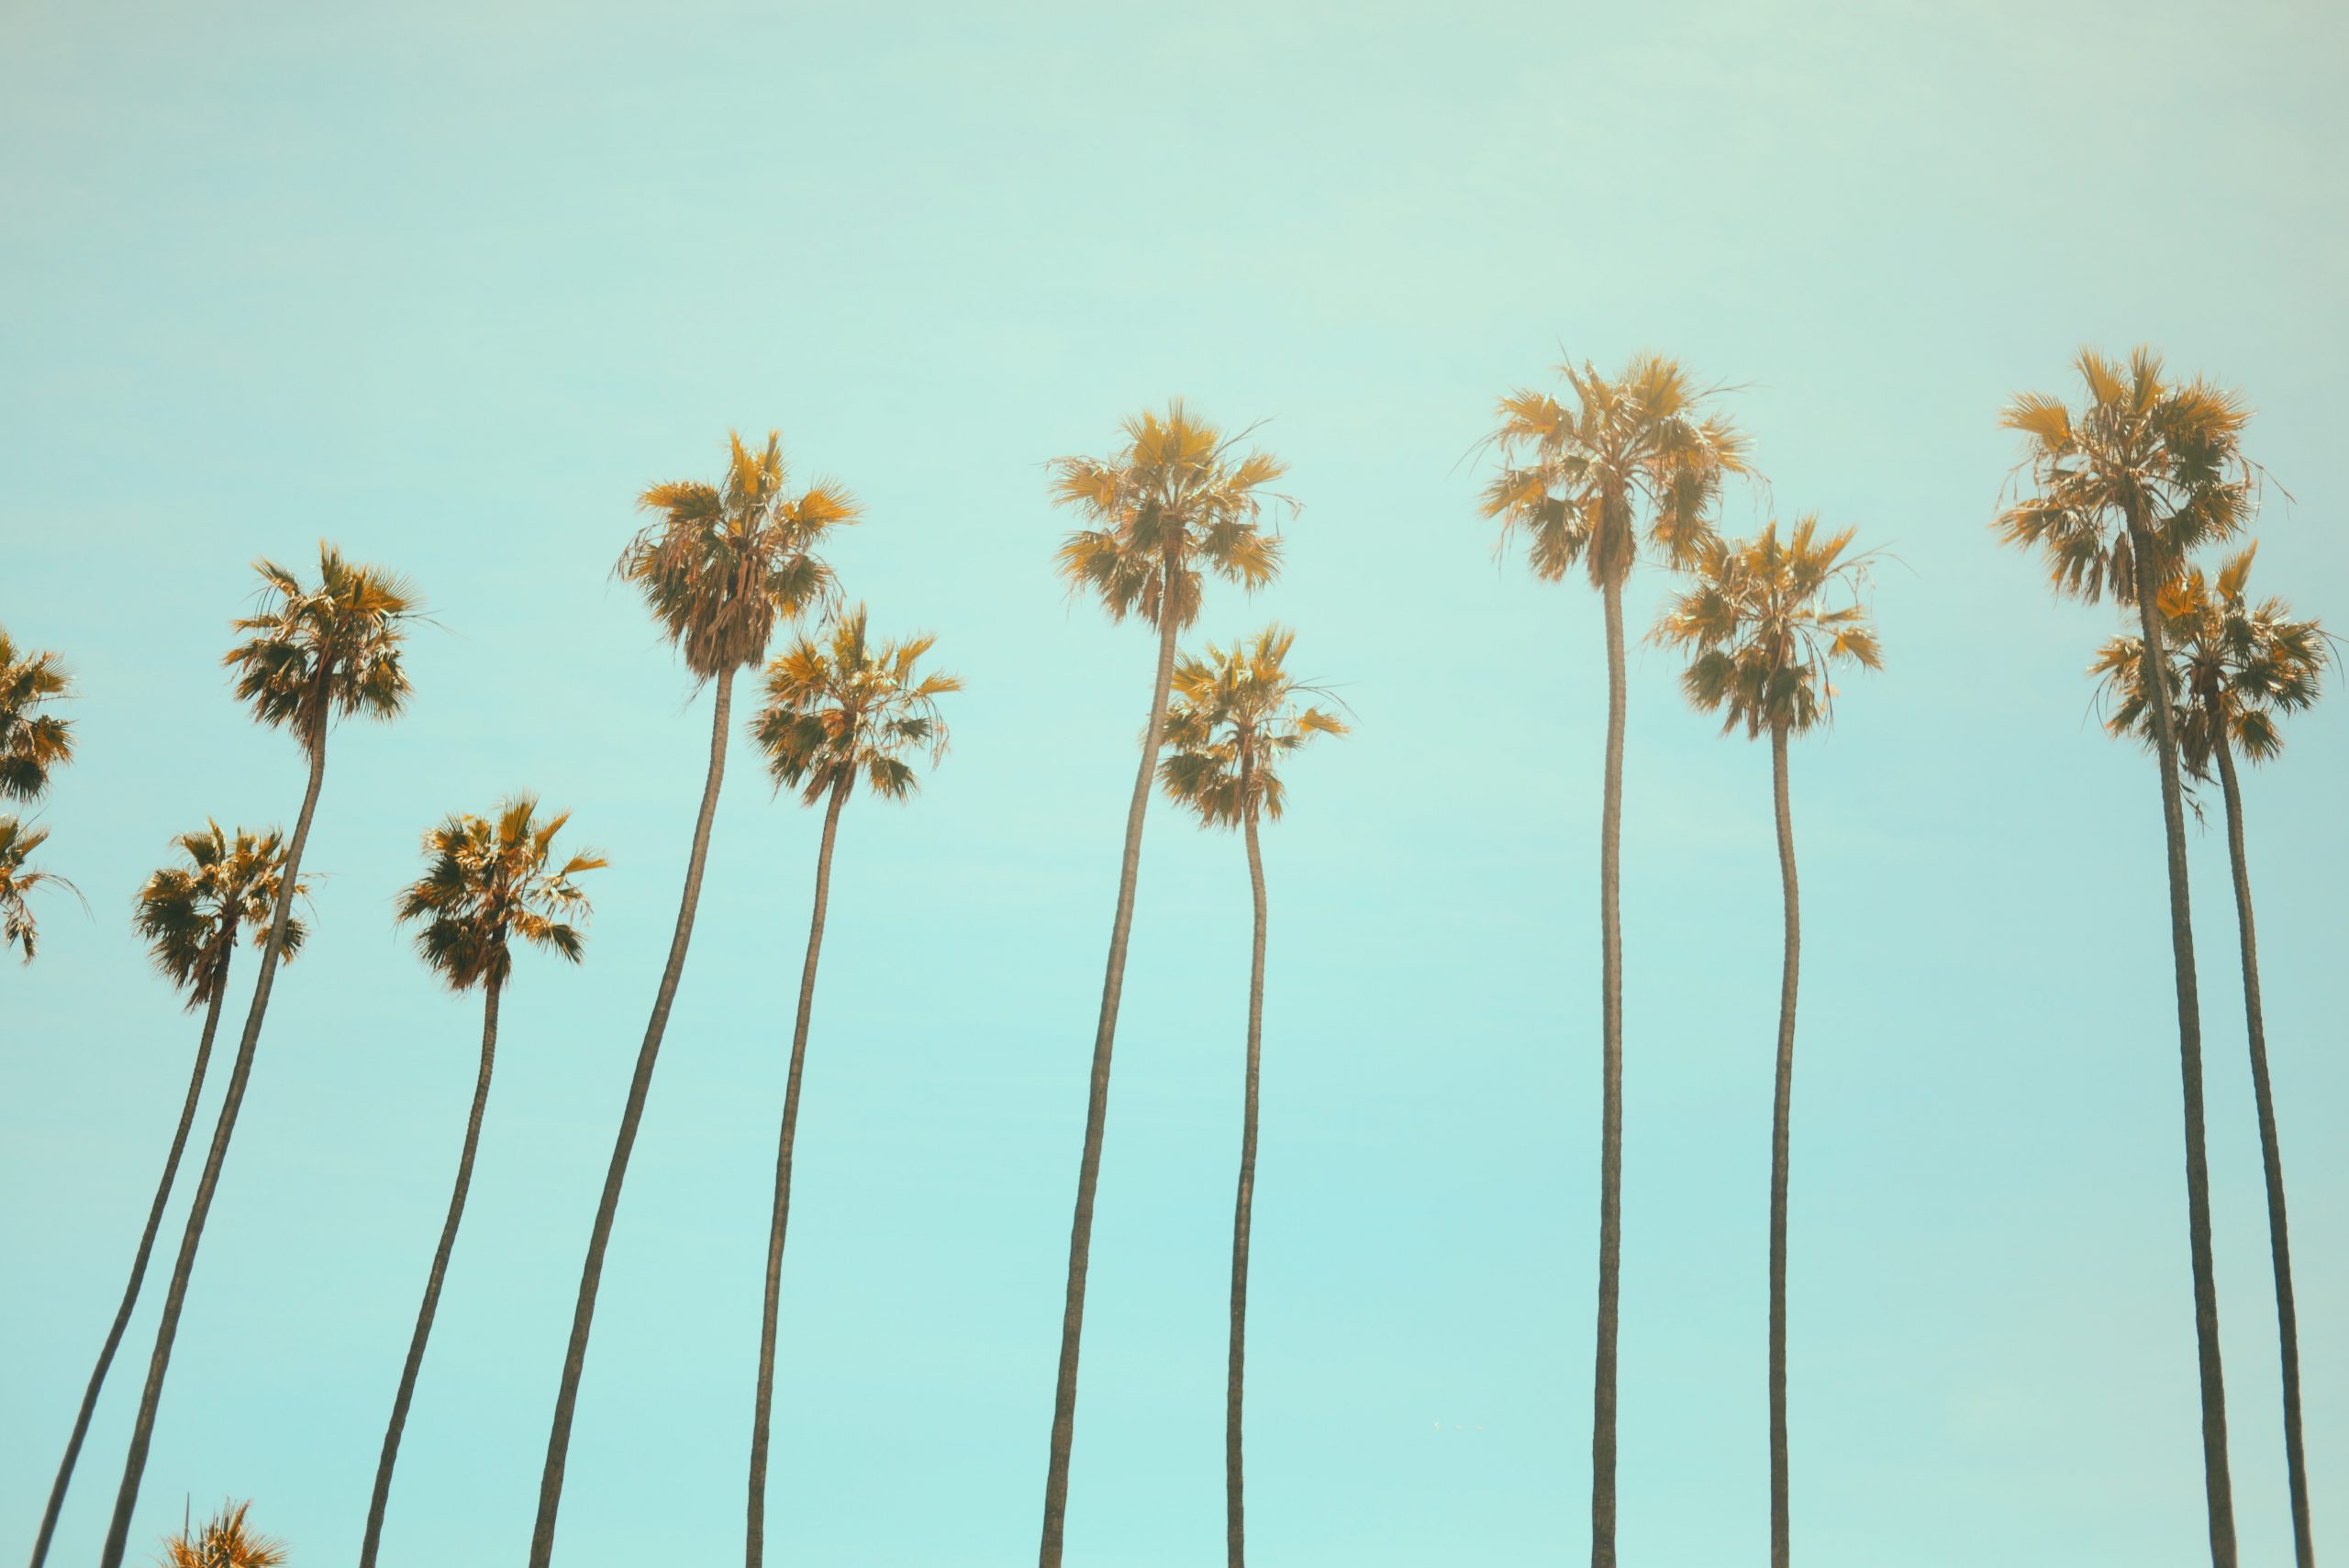 color photo of a row of palm trees